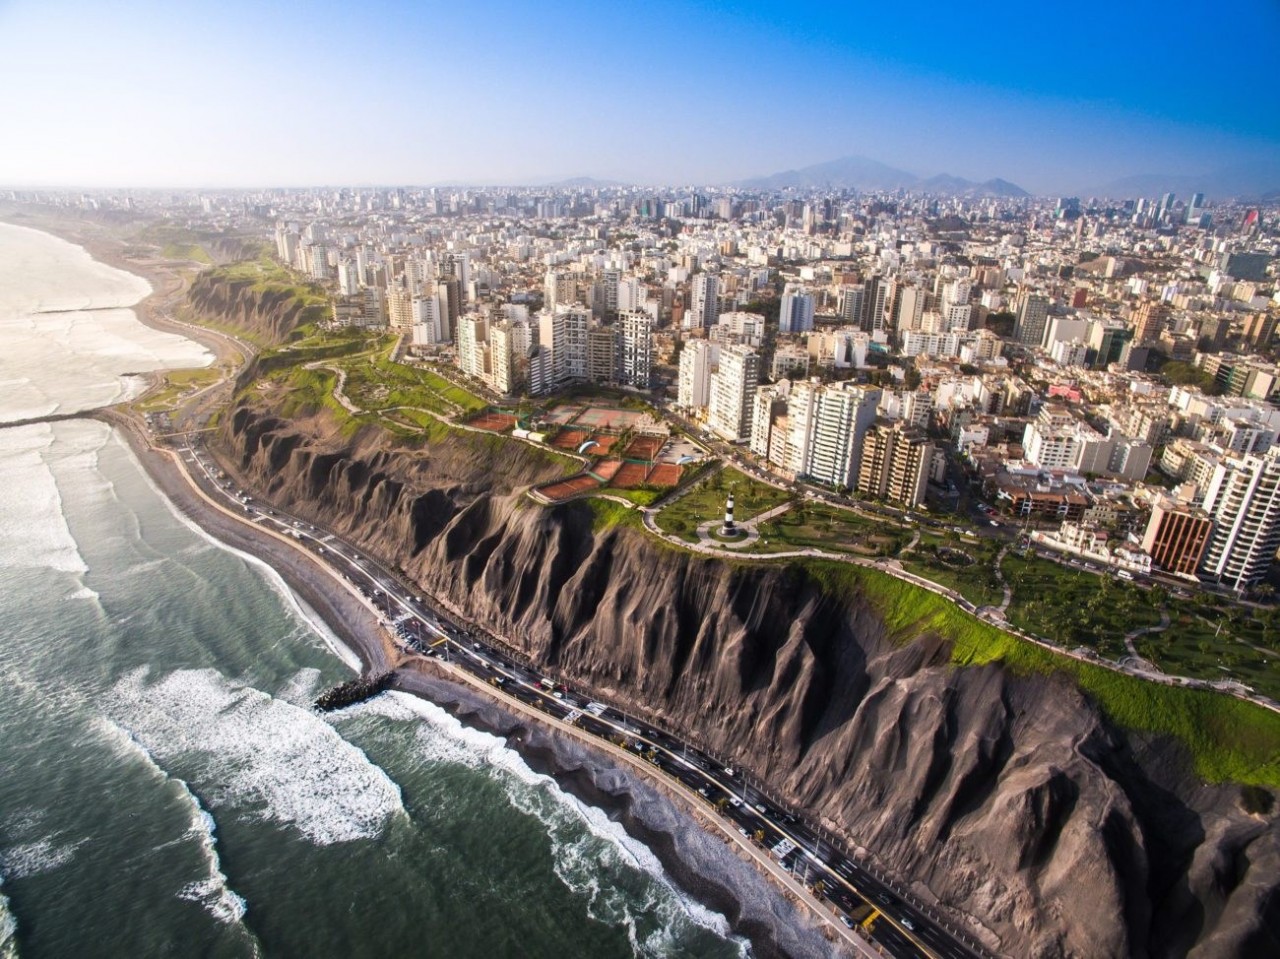 Explore Amazing Lima: The City That Rains Every 600 Years